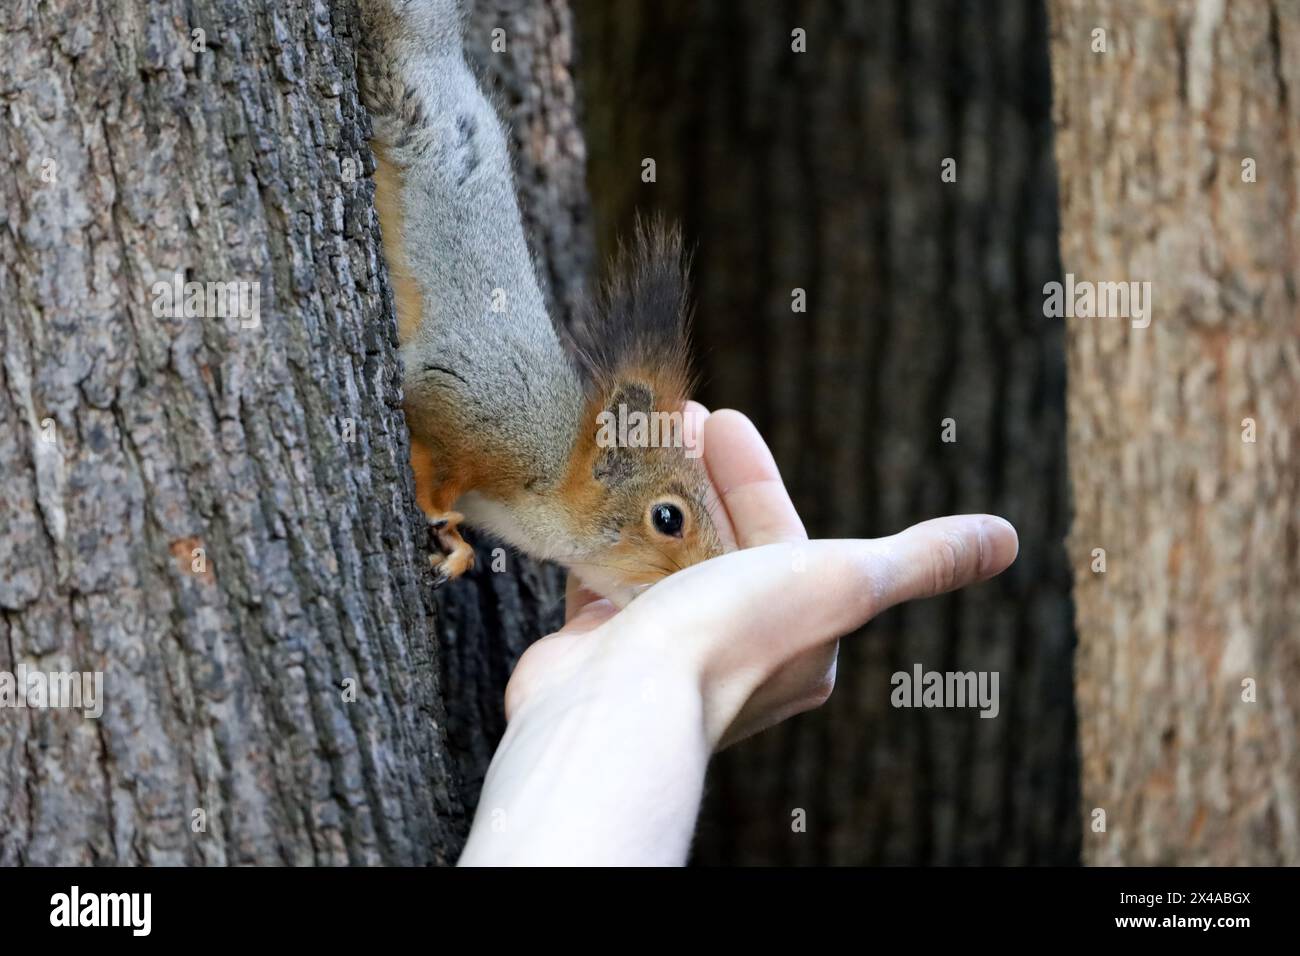 Red squirrel takes a nut out of a human hand. Feeding wild animals in a spring park Stock Photo